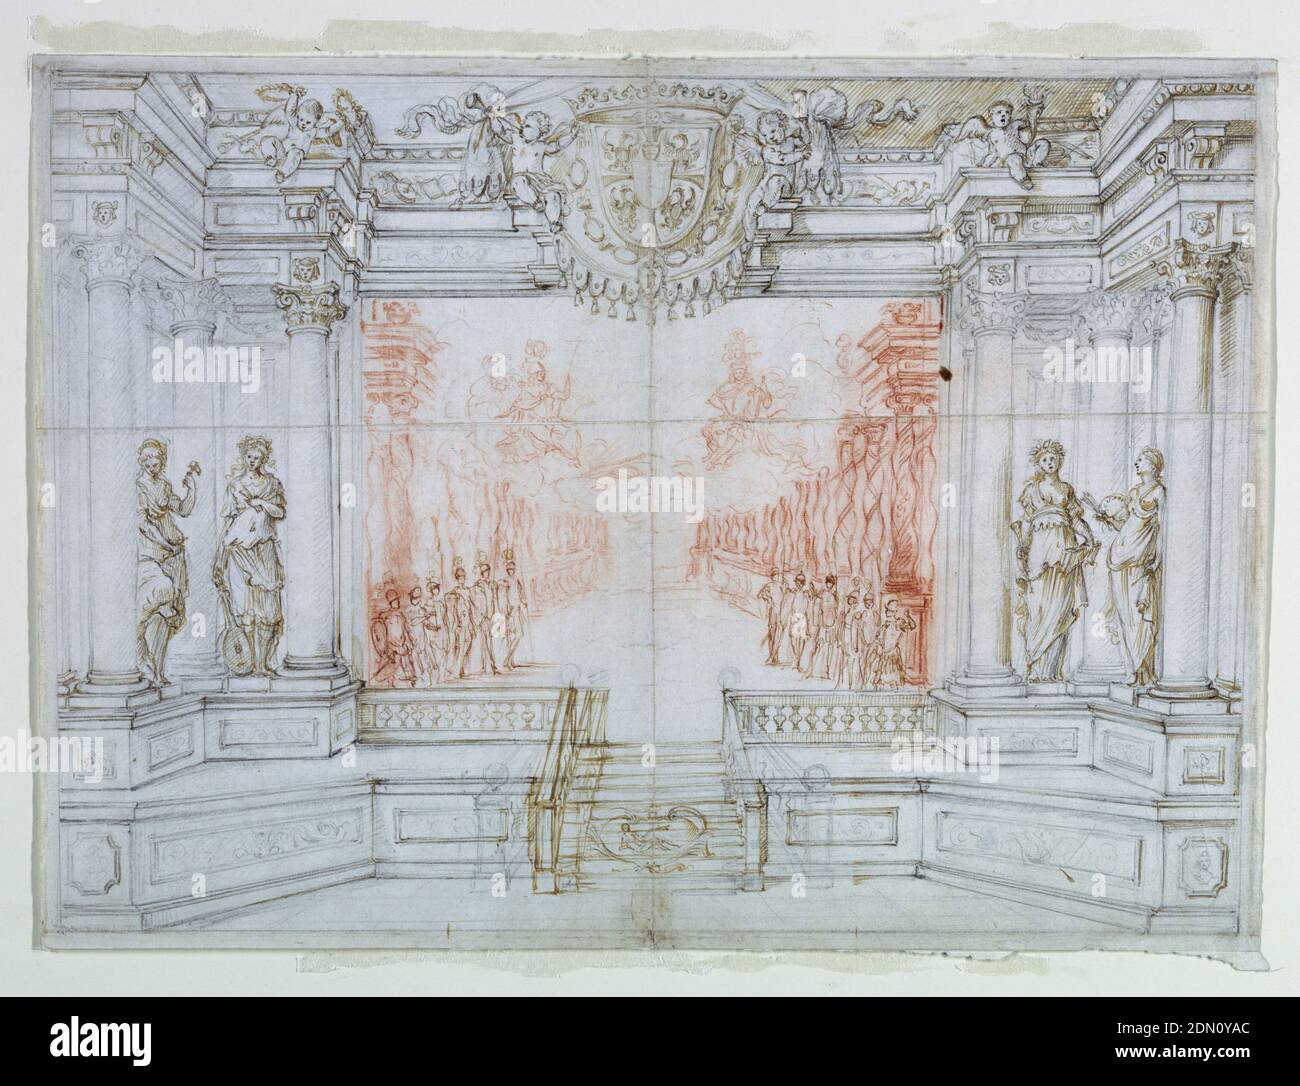 Proscenium and Stage Design: Scene 1, Ballet celebrating the marriage of Leopoldo Cesare, Duke of Mantua, and Claudia Felice, Archduchess of Austria, 1674, Giuseppe Maria Mitelli, 1634 – 1718, Leopold I, Austrian, 1640 - 1705, Claudia Felicitas, Italian, 1653 - 1676, Pen and brown ink, black and red chalk on white laid paper, A view of a stage and elaborate proscenium arch, through which a scene featuring a deep perspectival view populated by classical dieties. The red chalk is restricted to the figures and setting on stage, creating a strong contrast between the drama Stock Photo